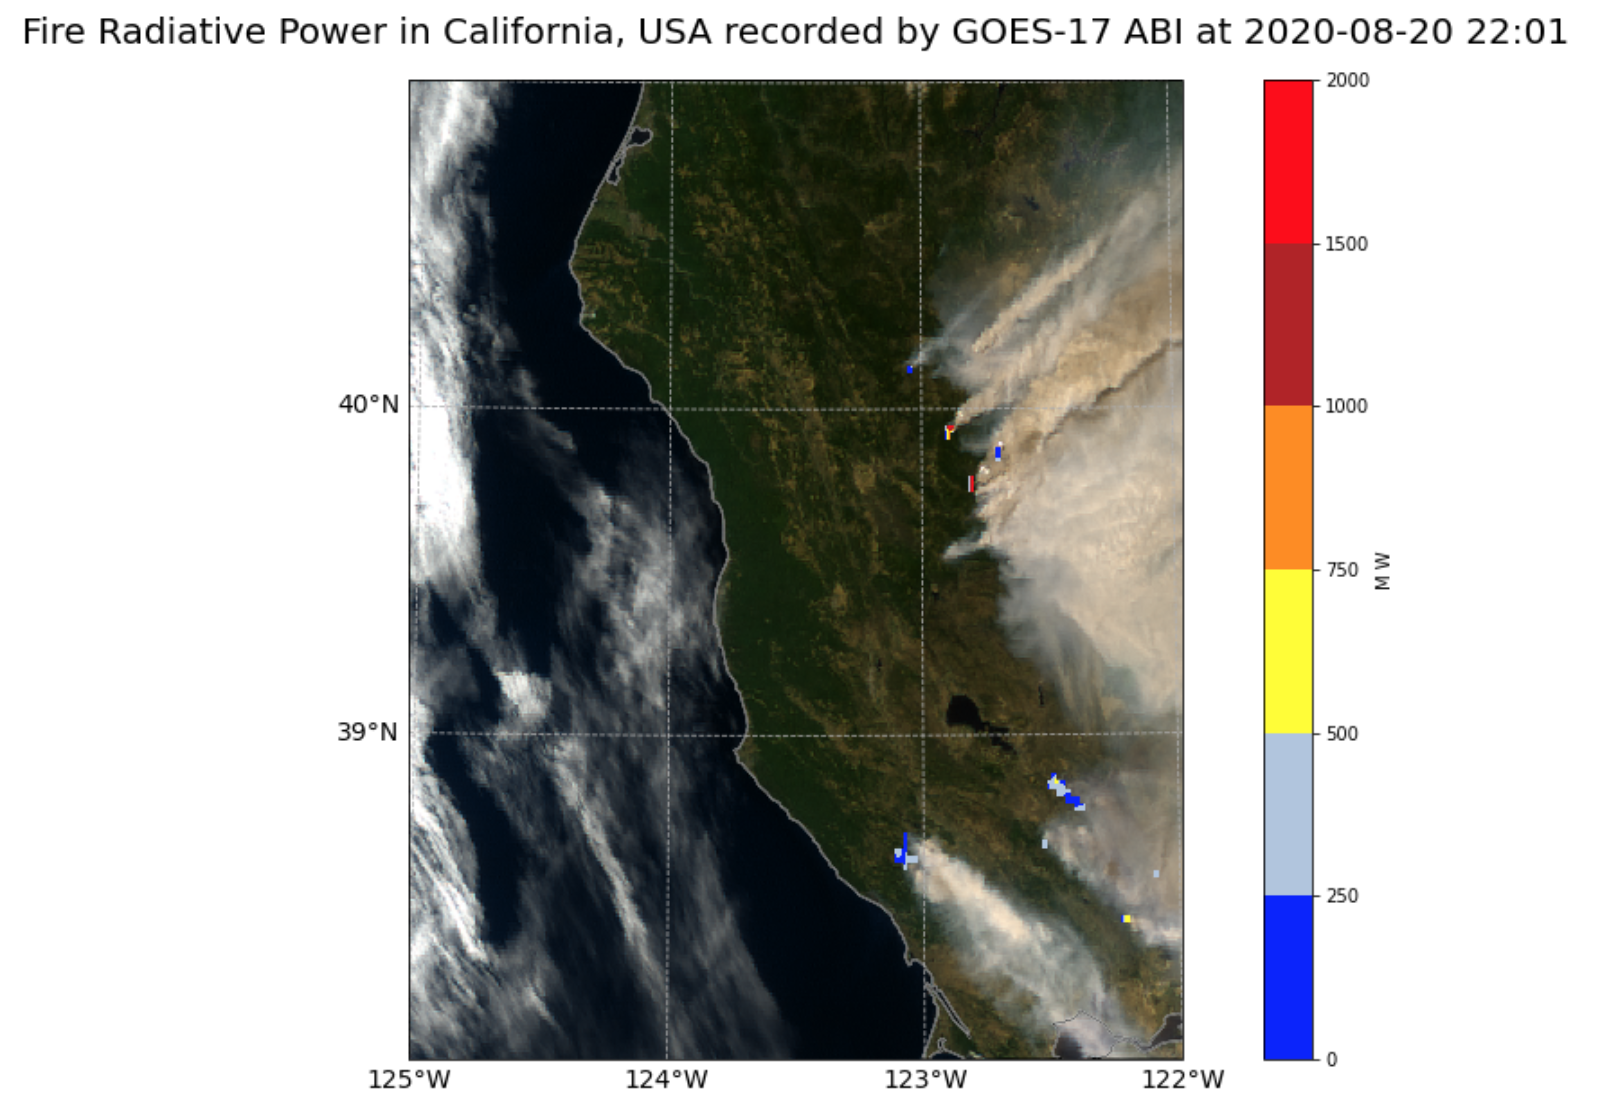 Figure 3. Fire Radiative Power in California, USA overlaid on a true colour composite, recorded by GOES-17 ABI on 20 August 2020.